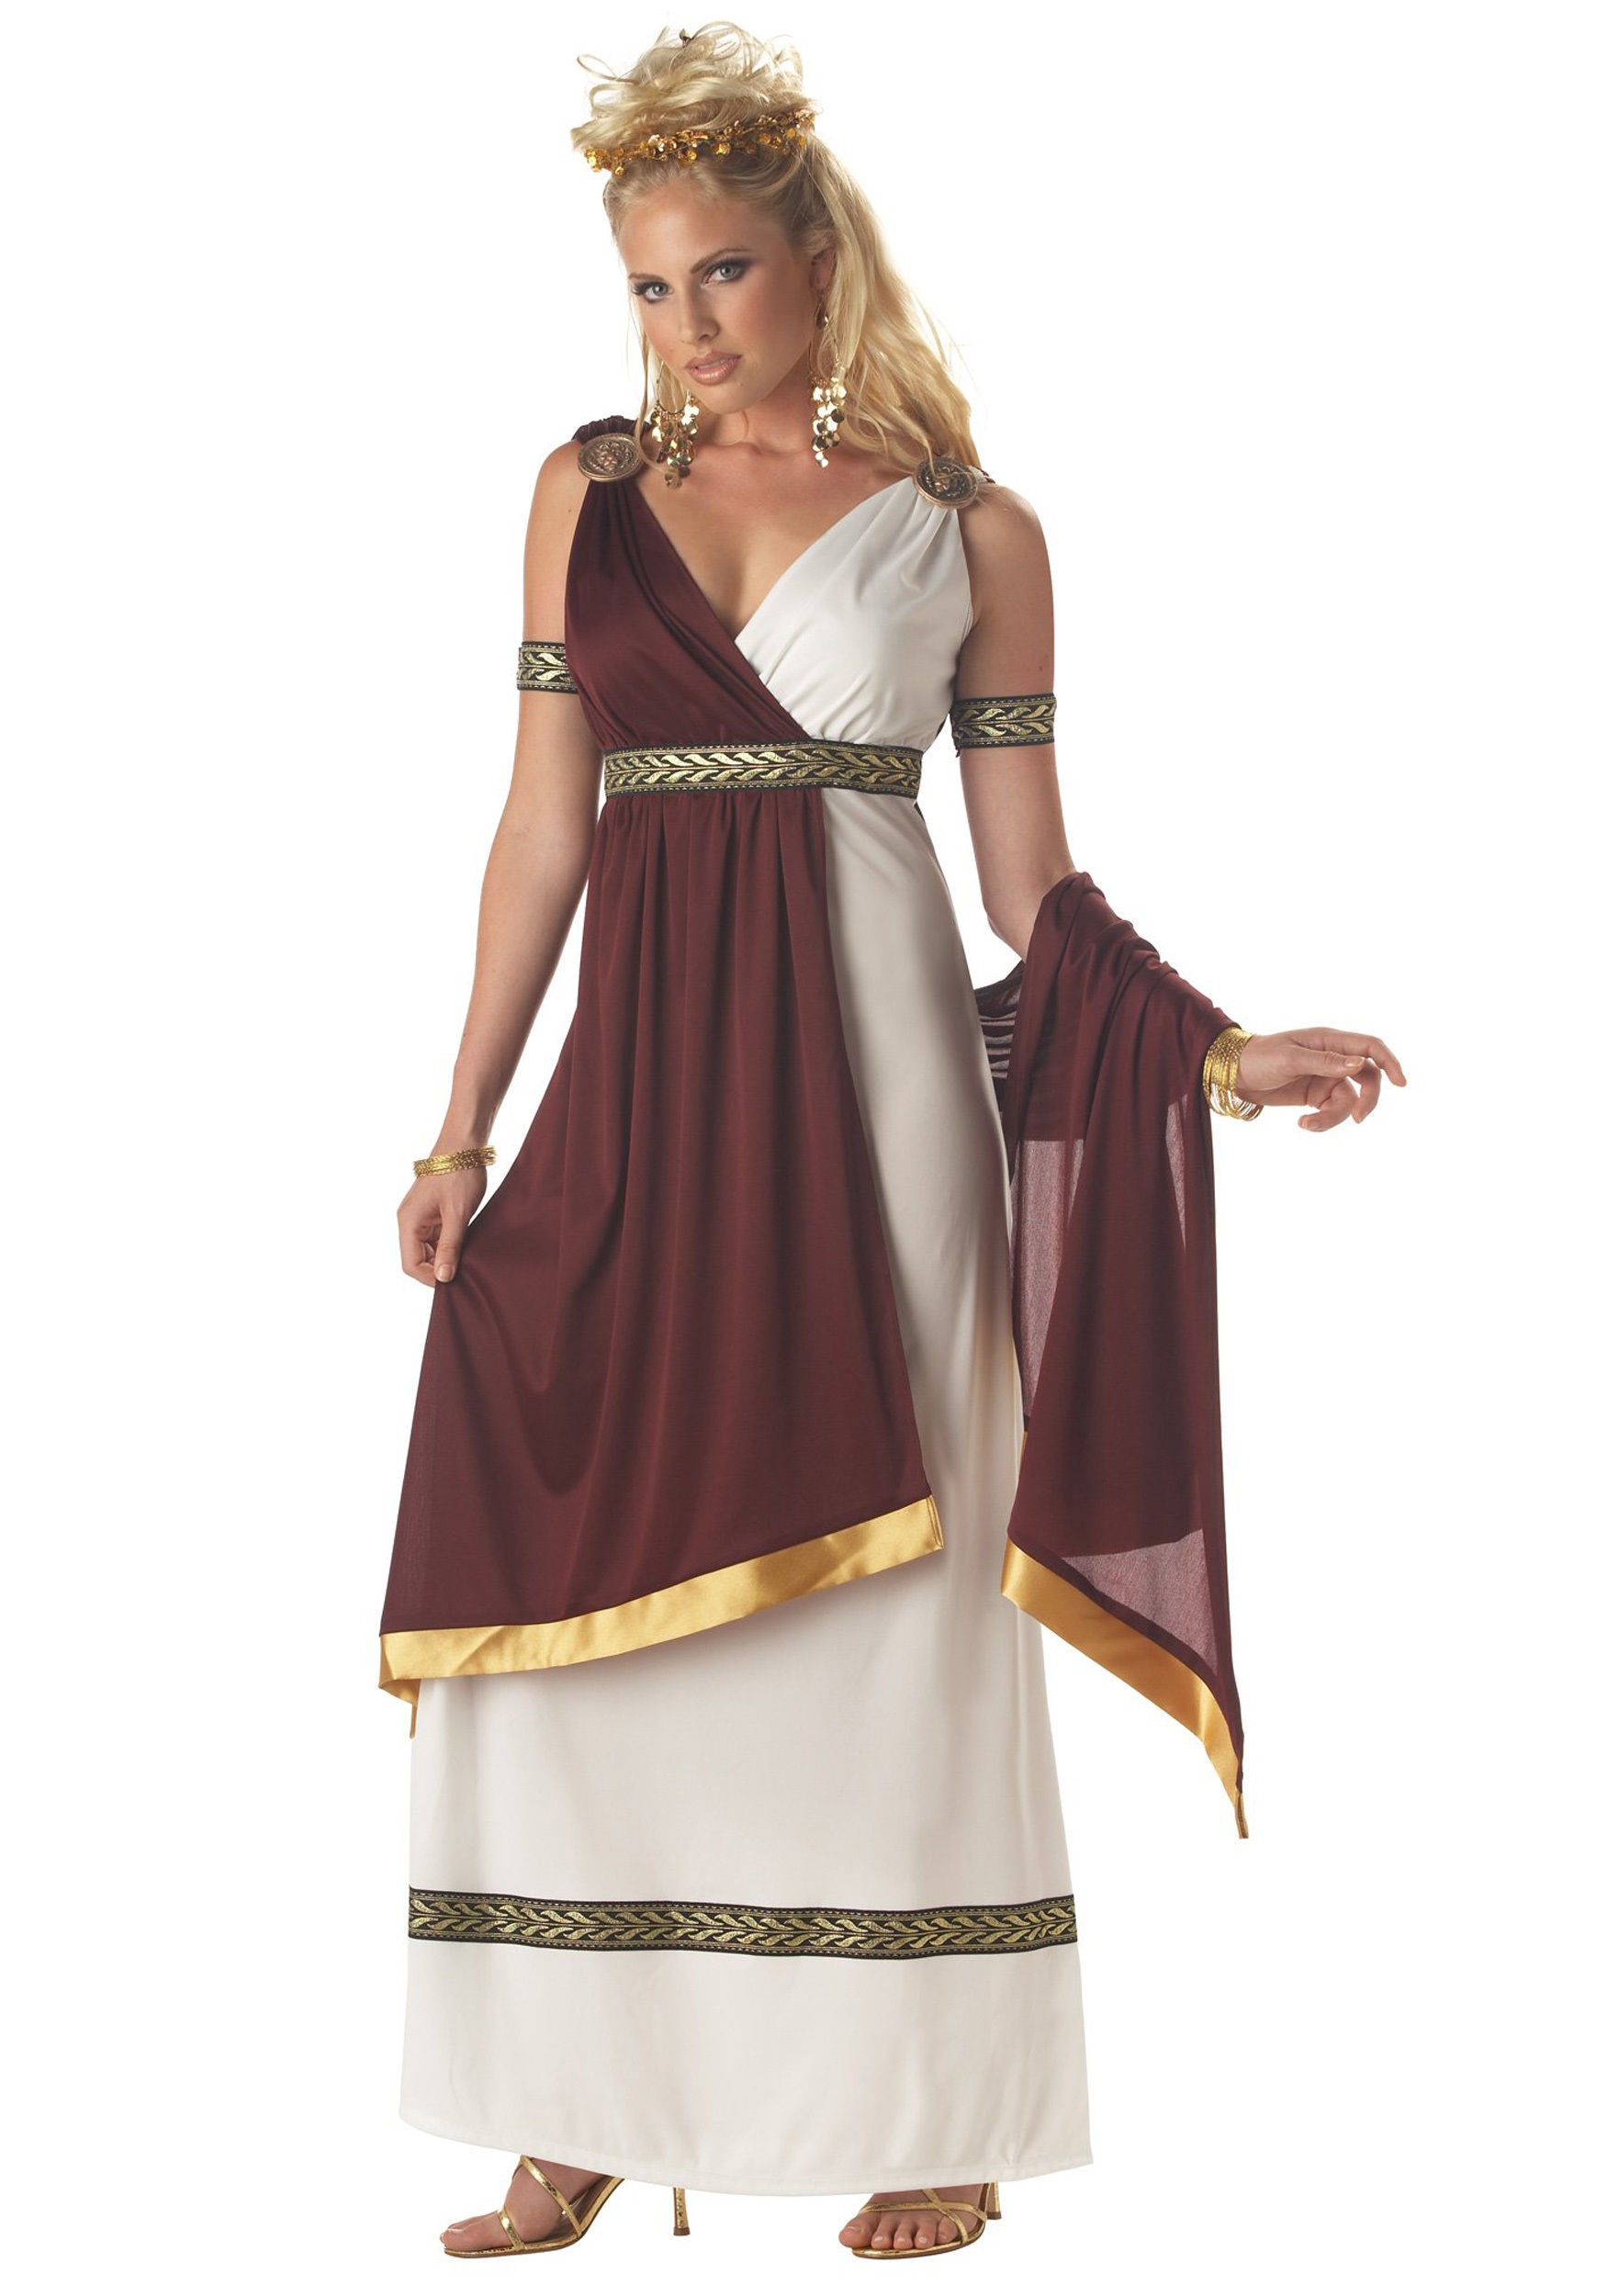 Photos - Fancy Dress California Costume Collection Women's Roman Toga Costume | Adult Toga Cost 